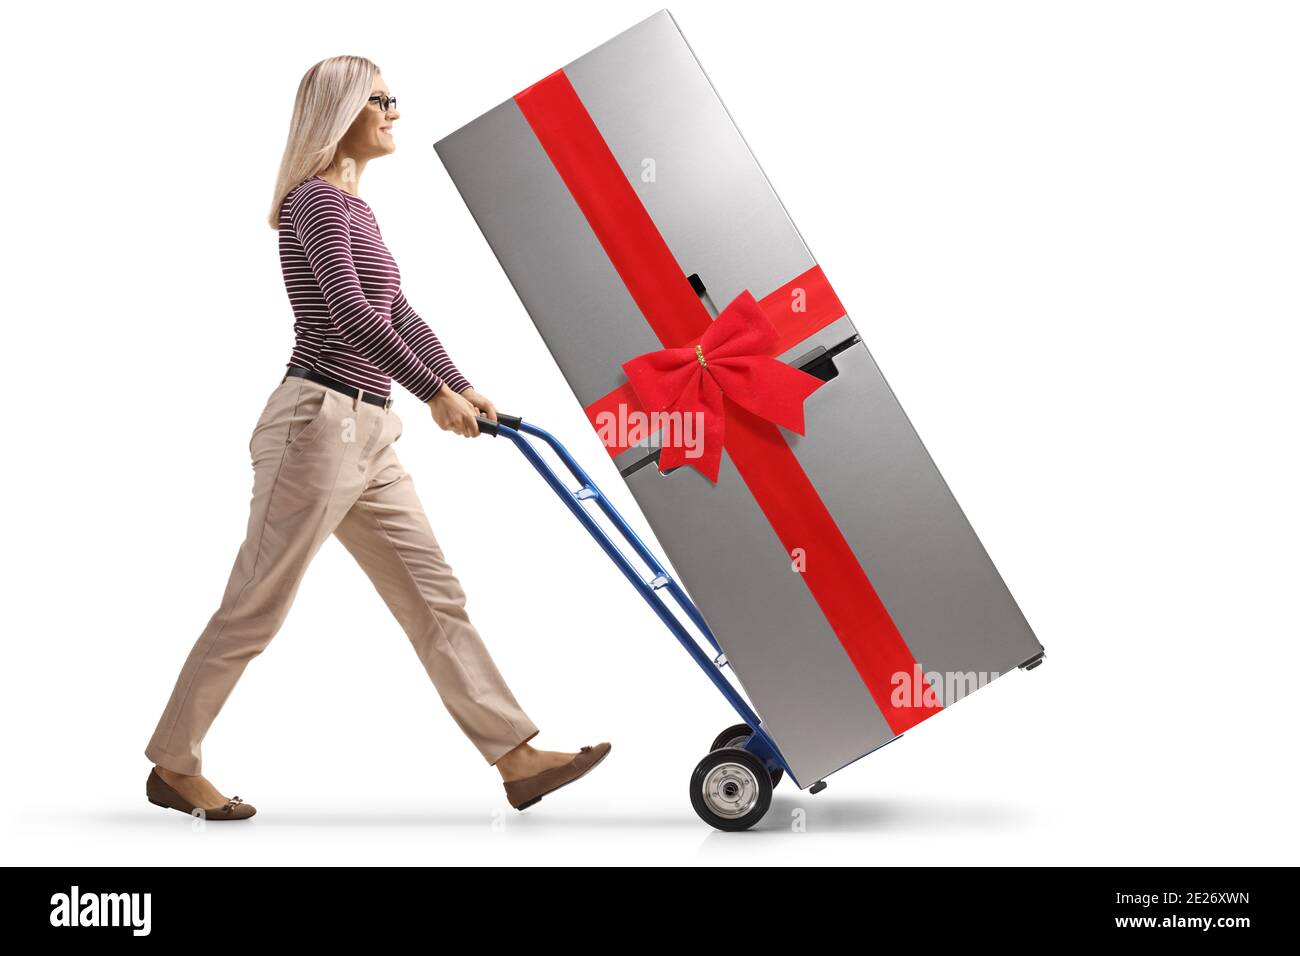 Full length profile shot of a young woman pushing a fridge with a red bow on a hand-truck isolated on white background Stock Photo